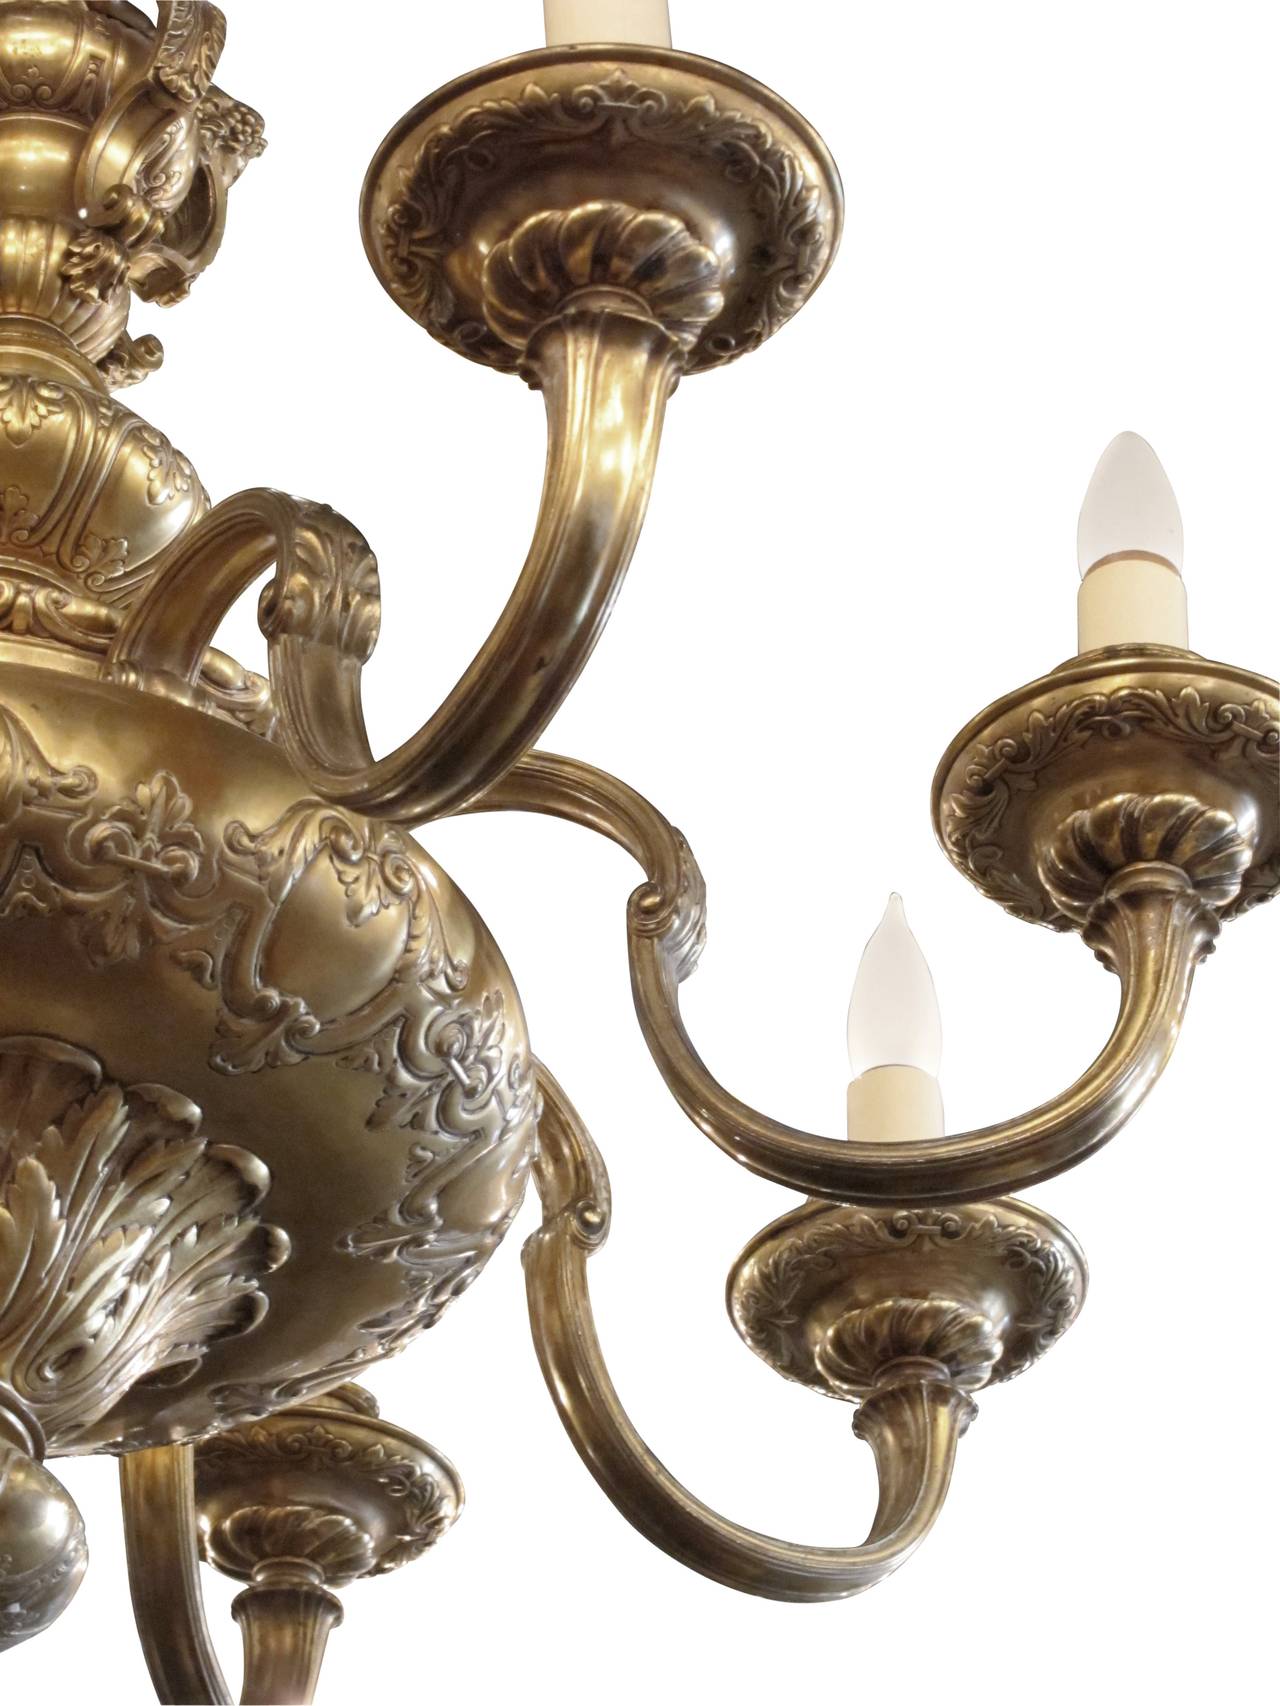 20th Century 1900s French Made Gold-Plated Eight-Arm Chandelier with Cherub Relief Work